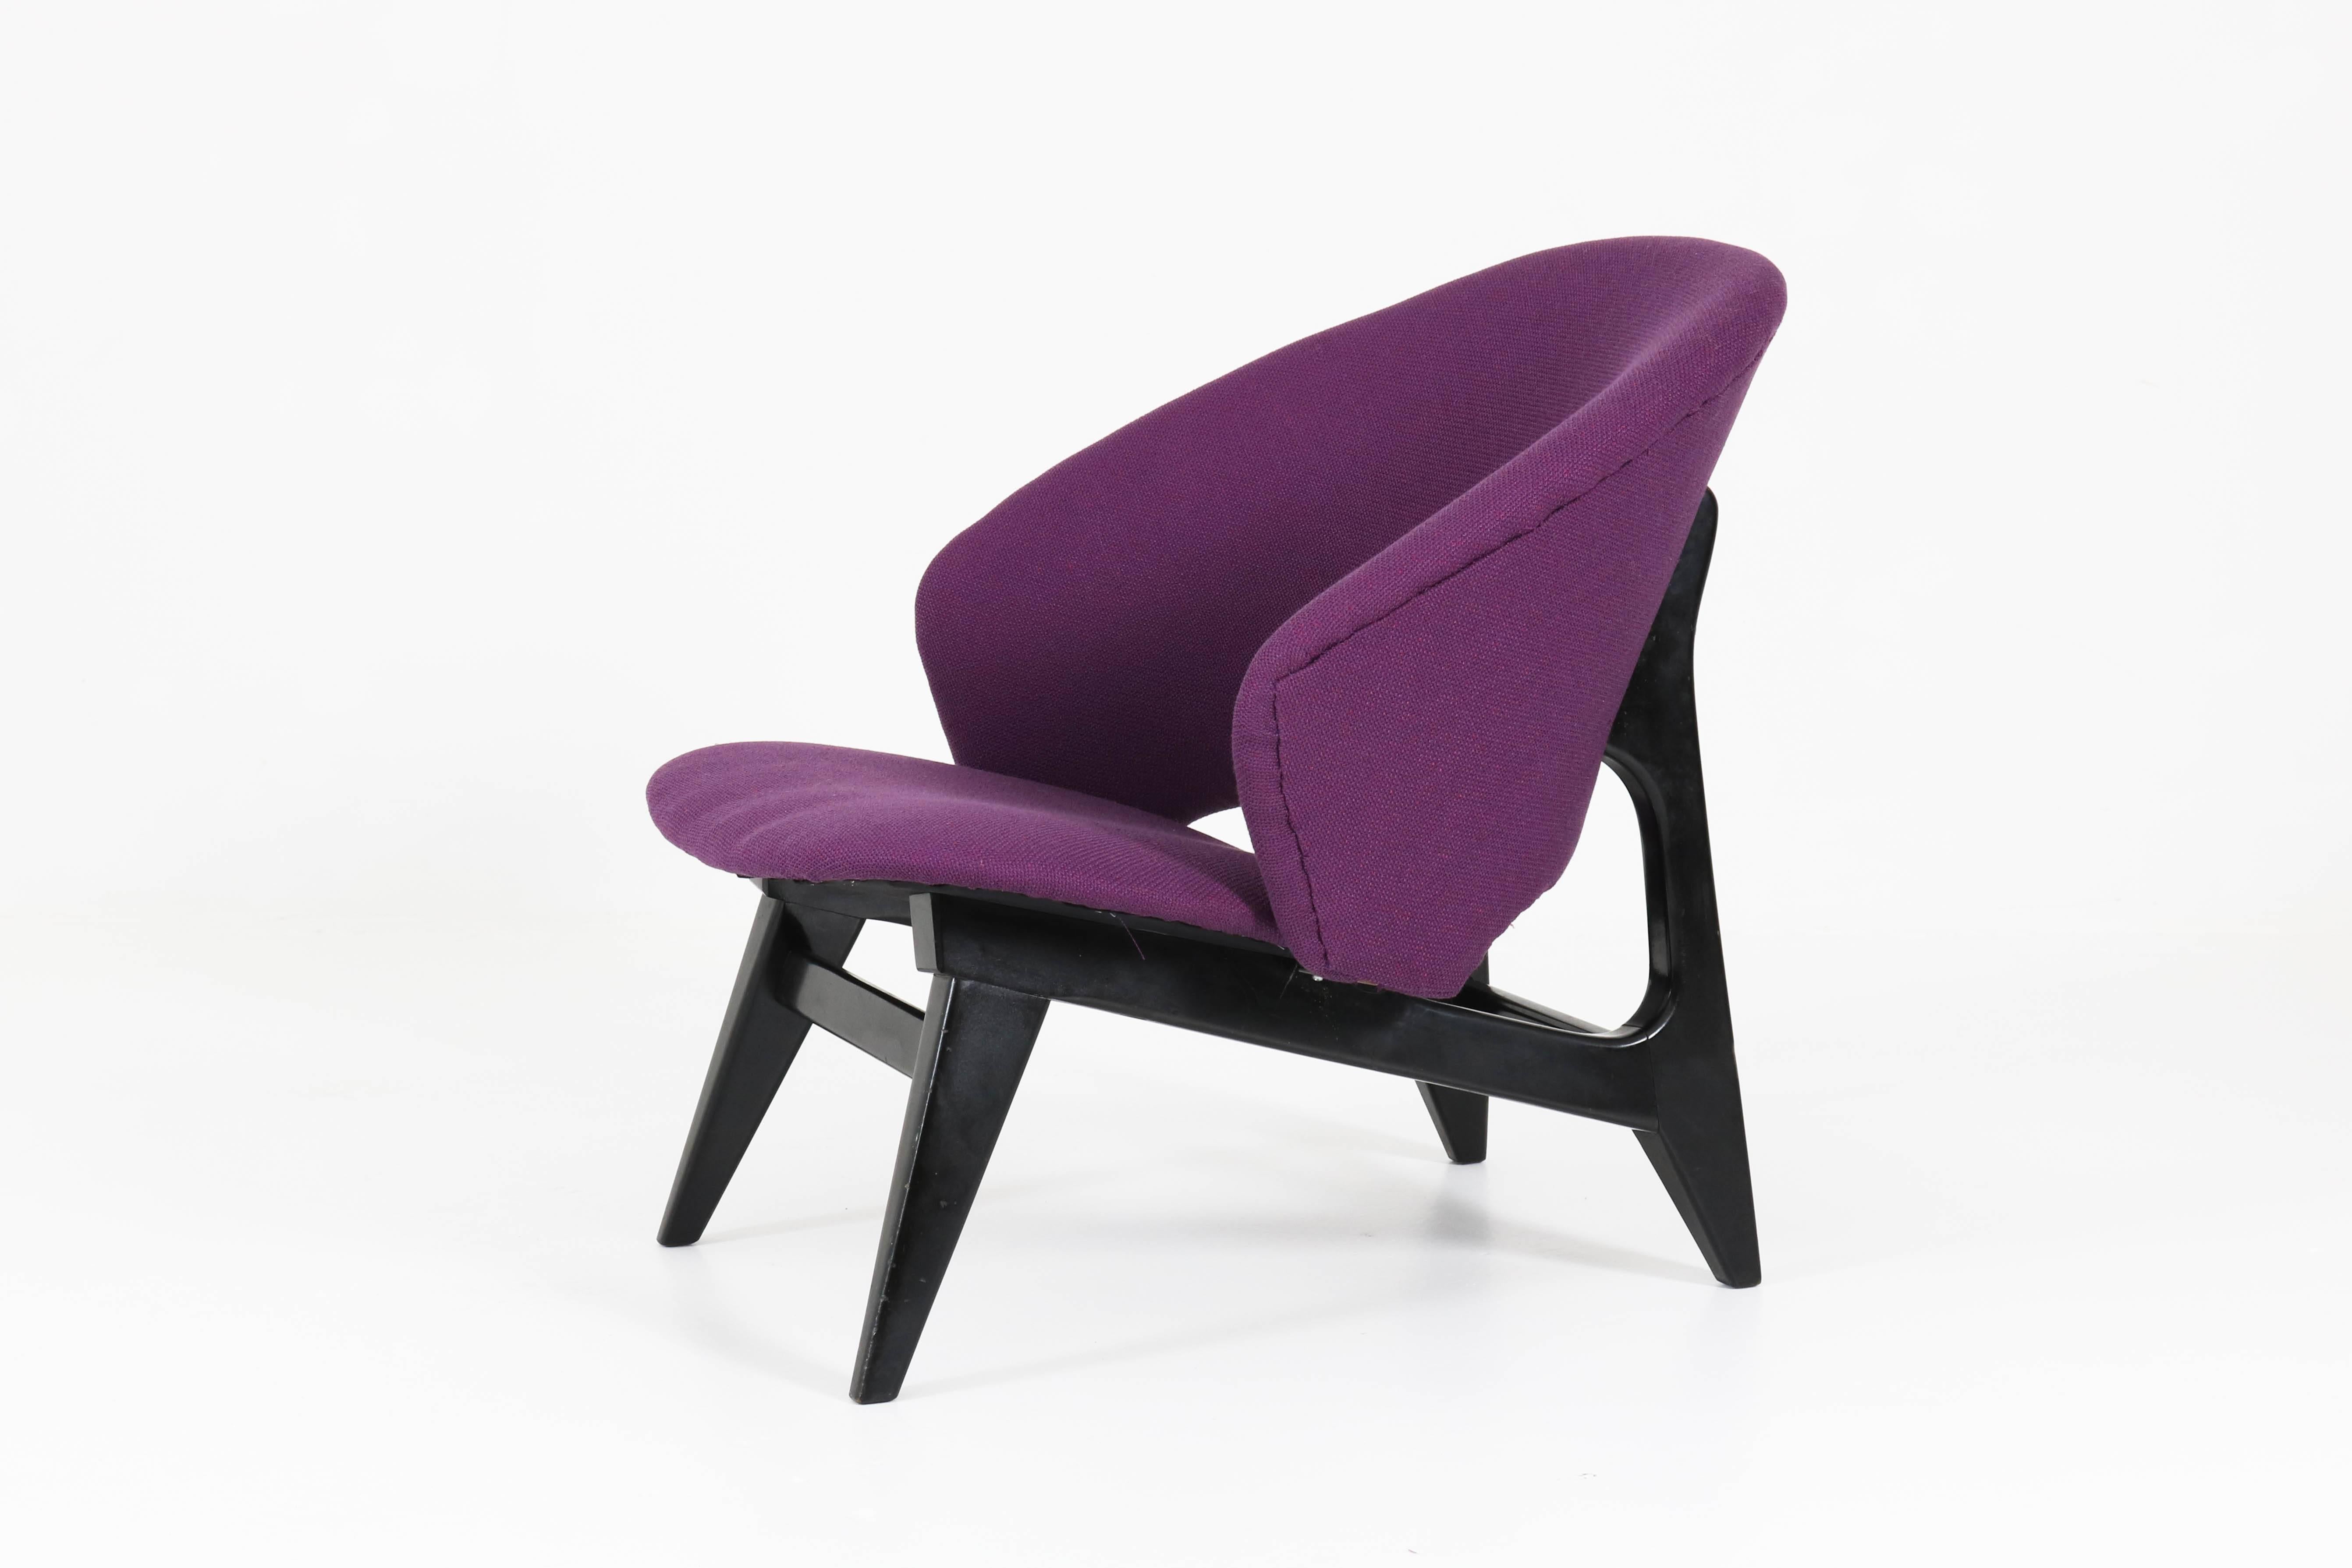 Mid-Century Modern lounge chair by Louis Van Teeffelen for Webe, 1960s.
Striking Dutch design from the 1960s.
Original black lacquered wooden frame and re-upholstered with exclusive purple fabric.
In very good condition with minor wear consistent